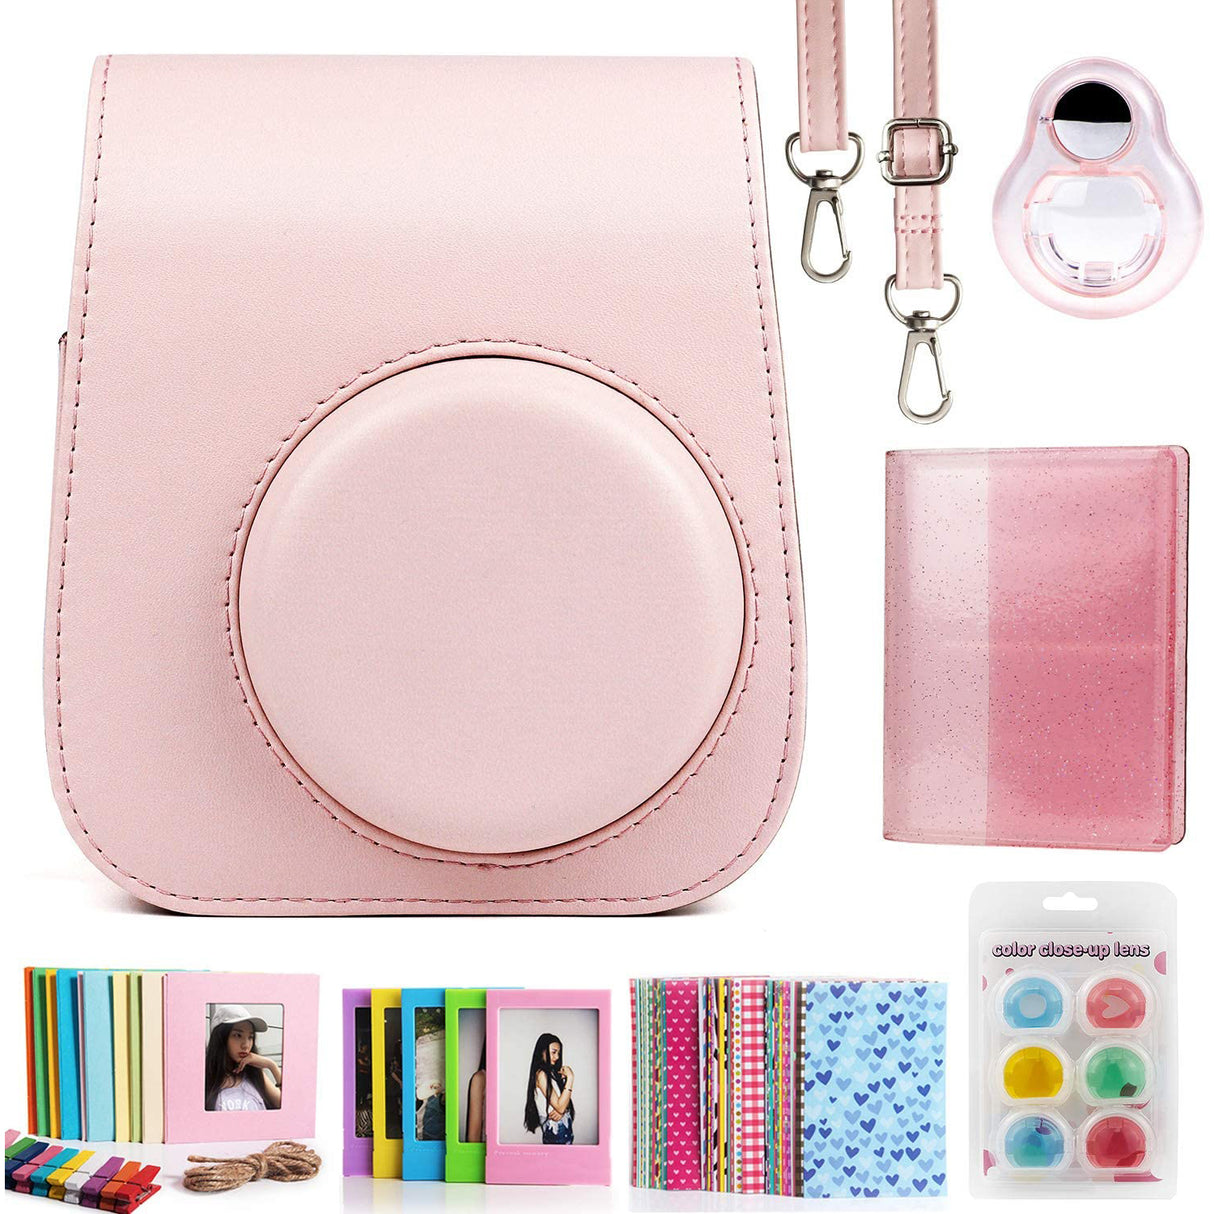 ZENKO Compatible Mini 11 Camera Case Bundle with Album, Filters Other Accessories (7 Items) Pink